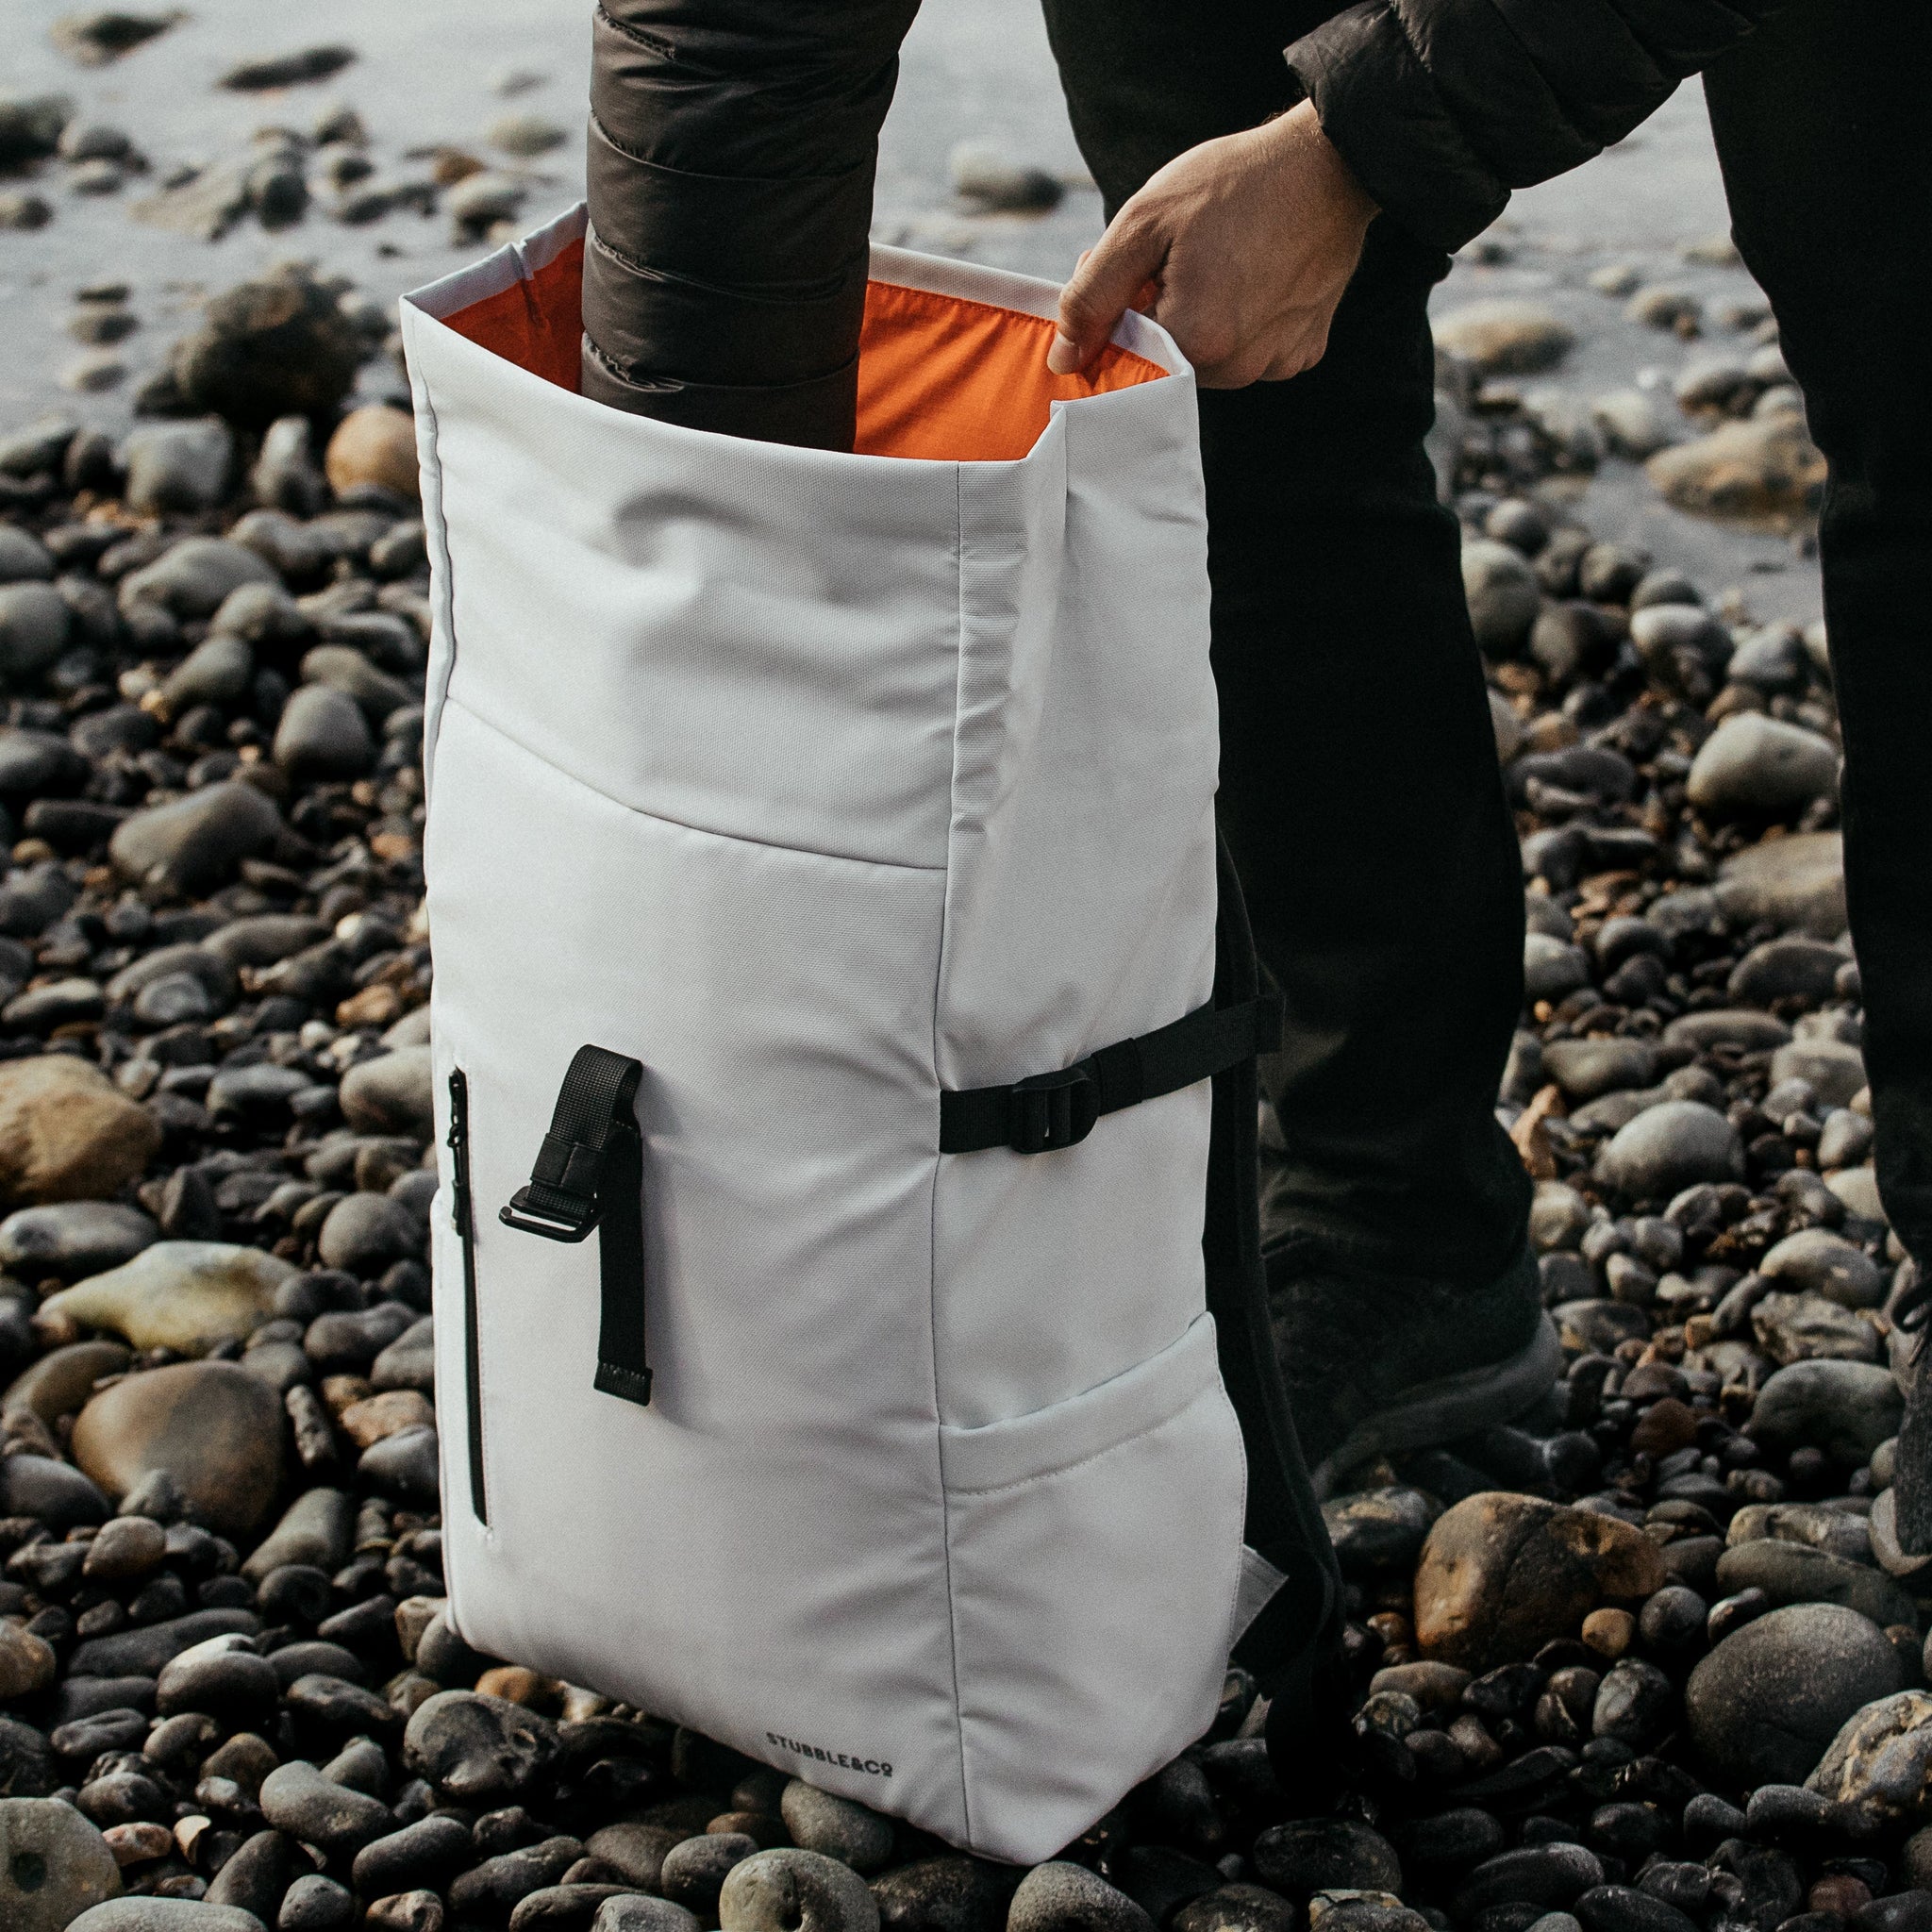 The Roll Top in Arctic White on a pebble beach with someone reaching inside the open bag.